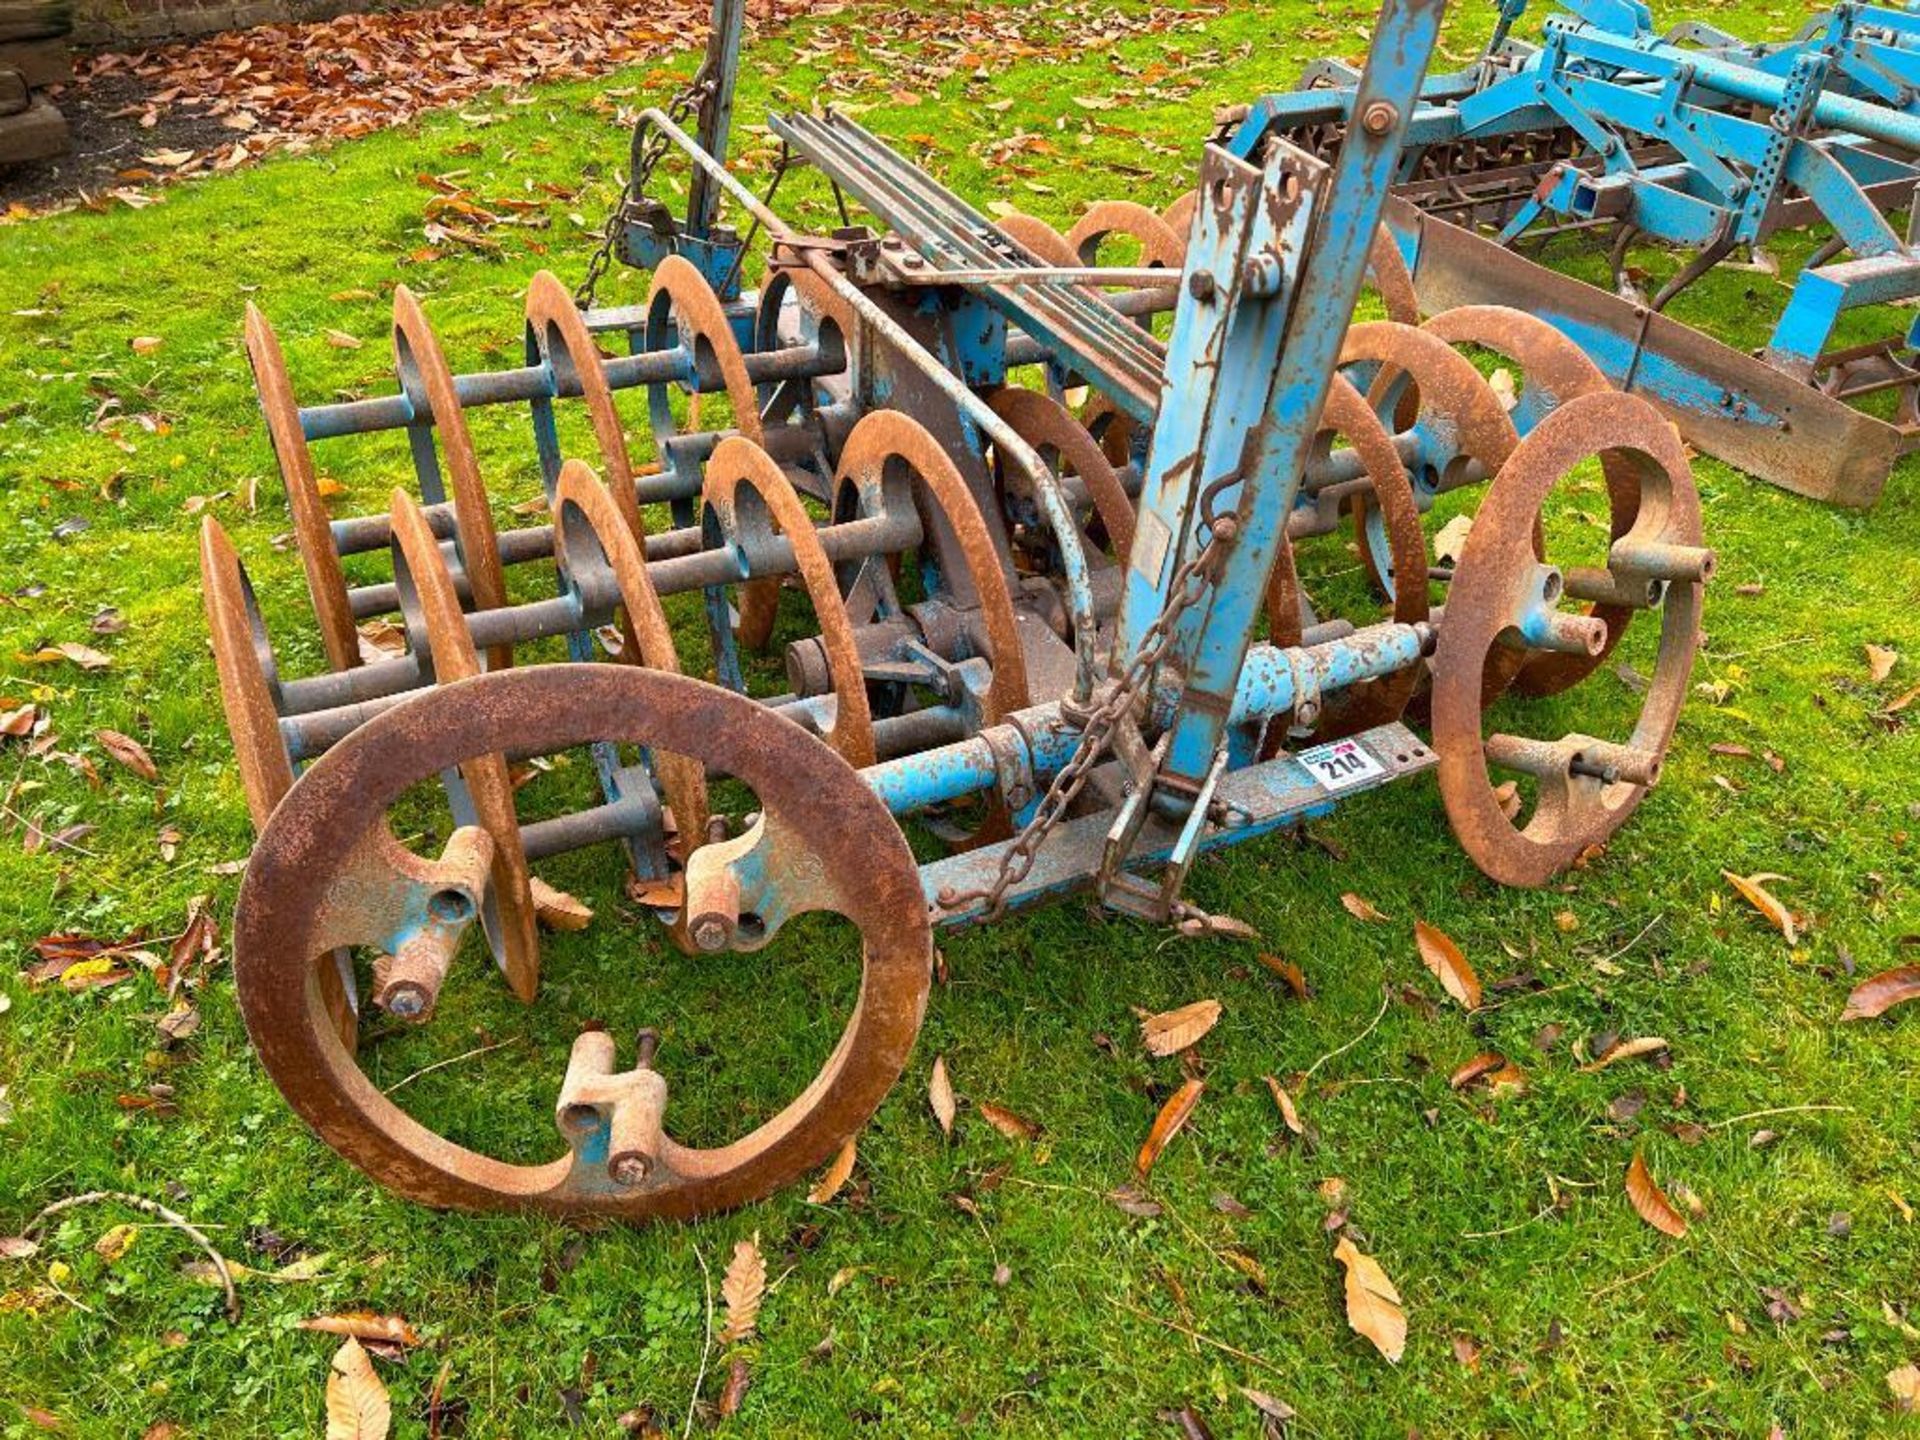 1985 Lemken 1.82m press on 3 point linkage frame, c/w 2 press rings. On farm from new. Serial No: 00 - Image 5 of 6